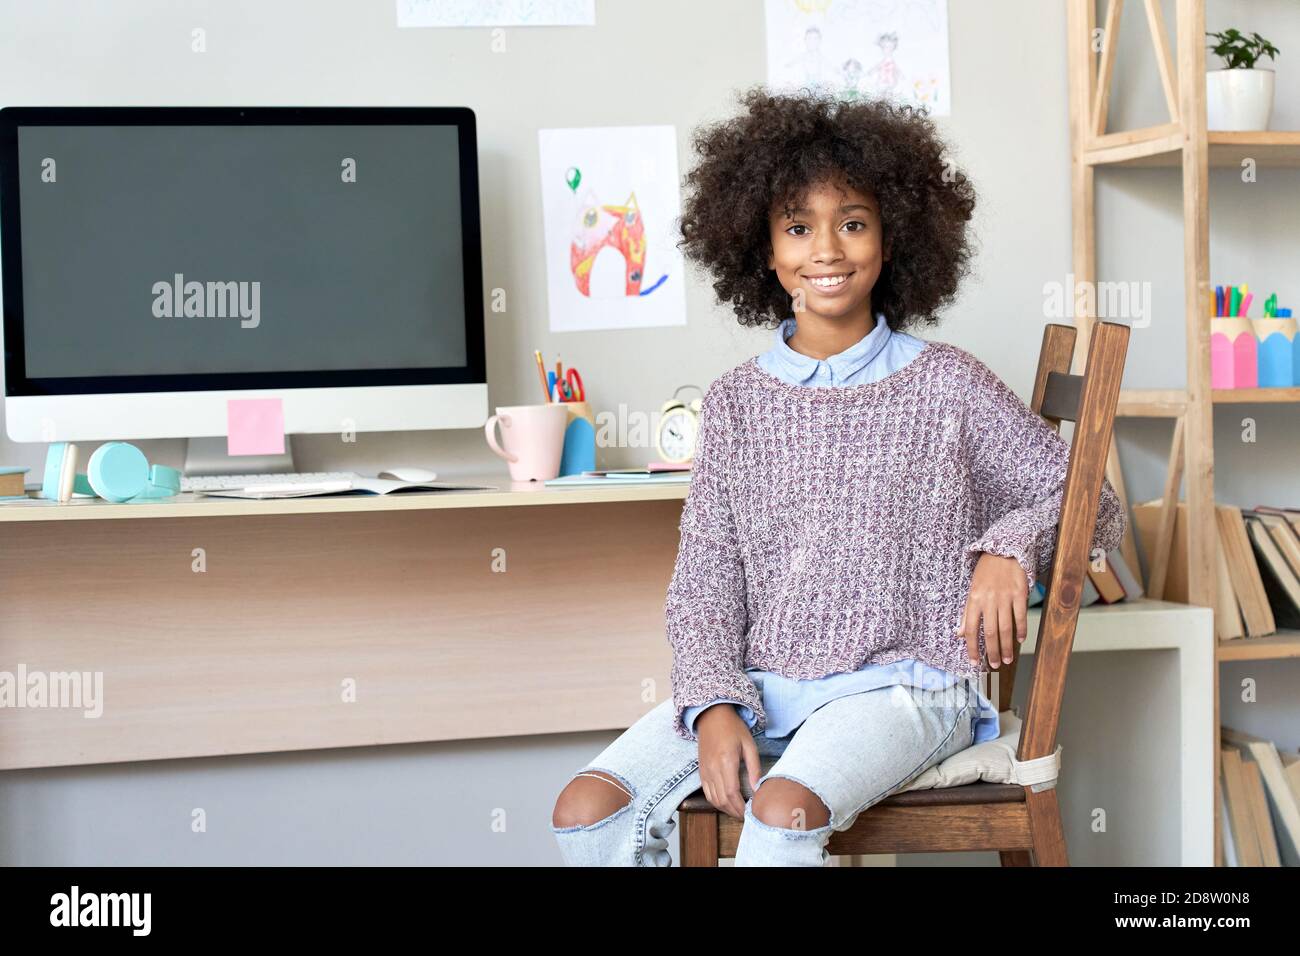 Happy african kid girl looking at camera sitting at home desk with computer. Stock Photo